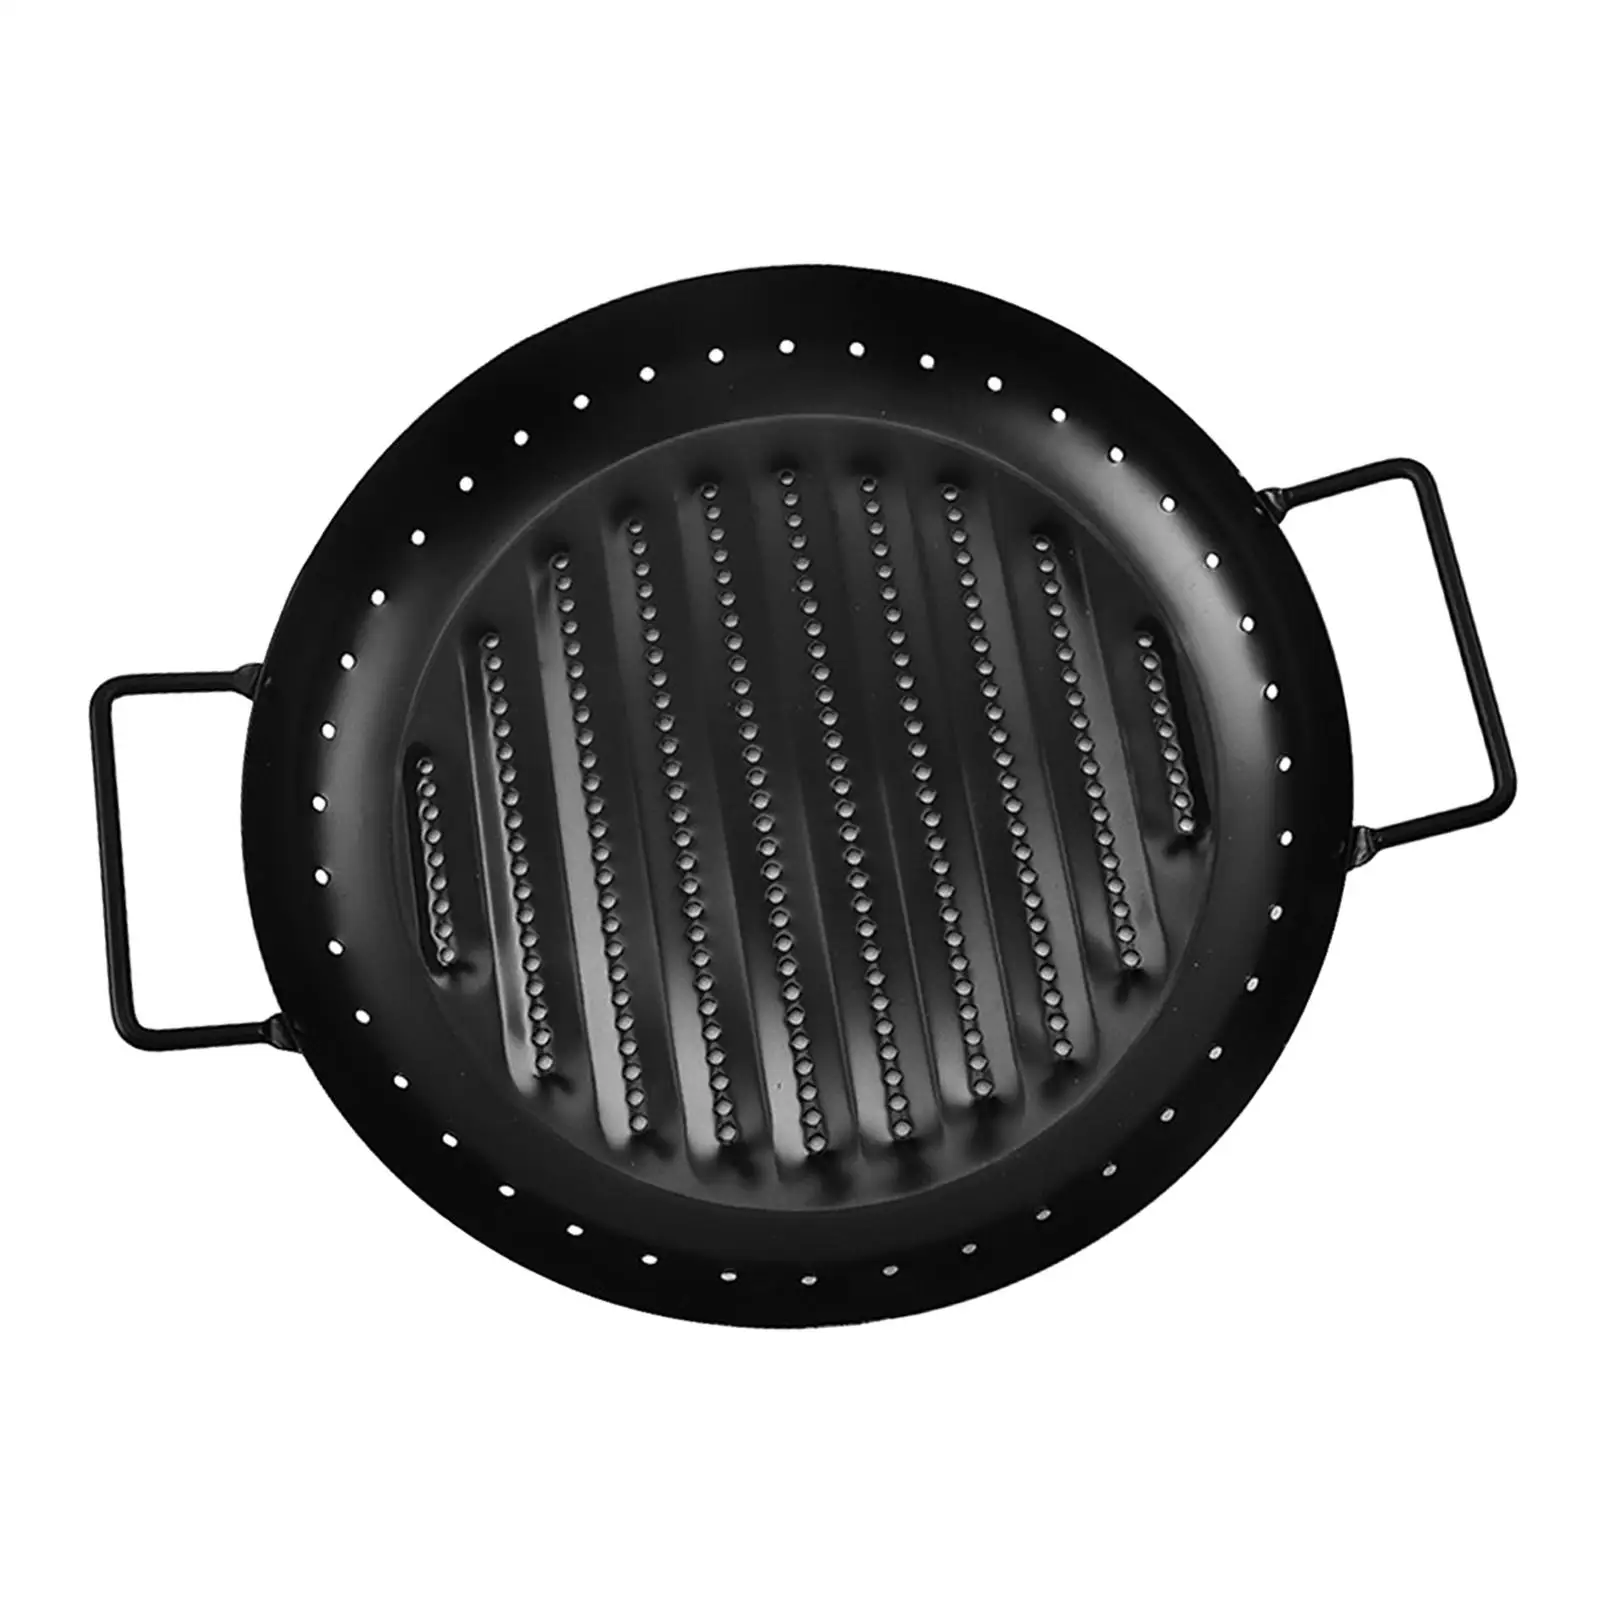 Grill Pans Barbecue Grilling Baskets for Baking Restaurant Indoor Outdoor